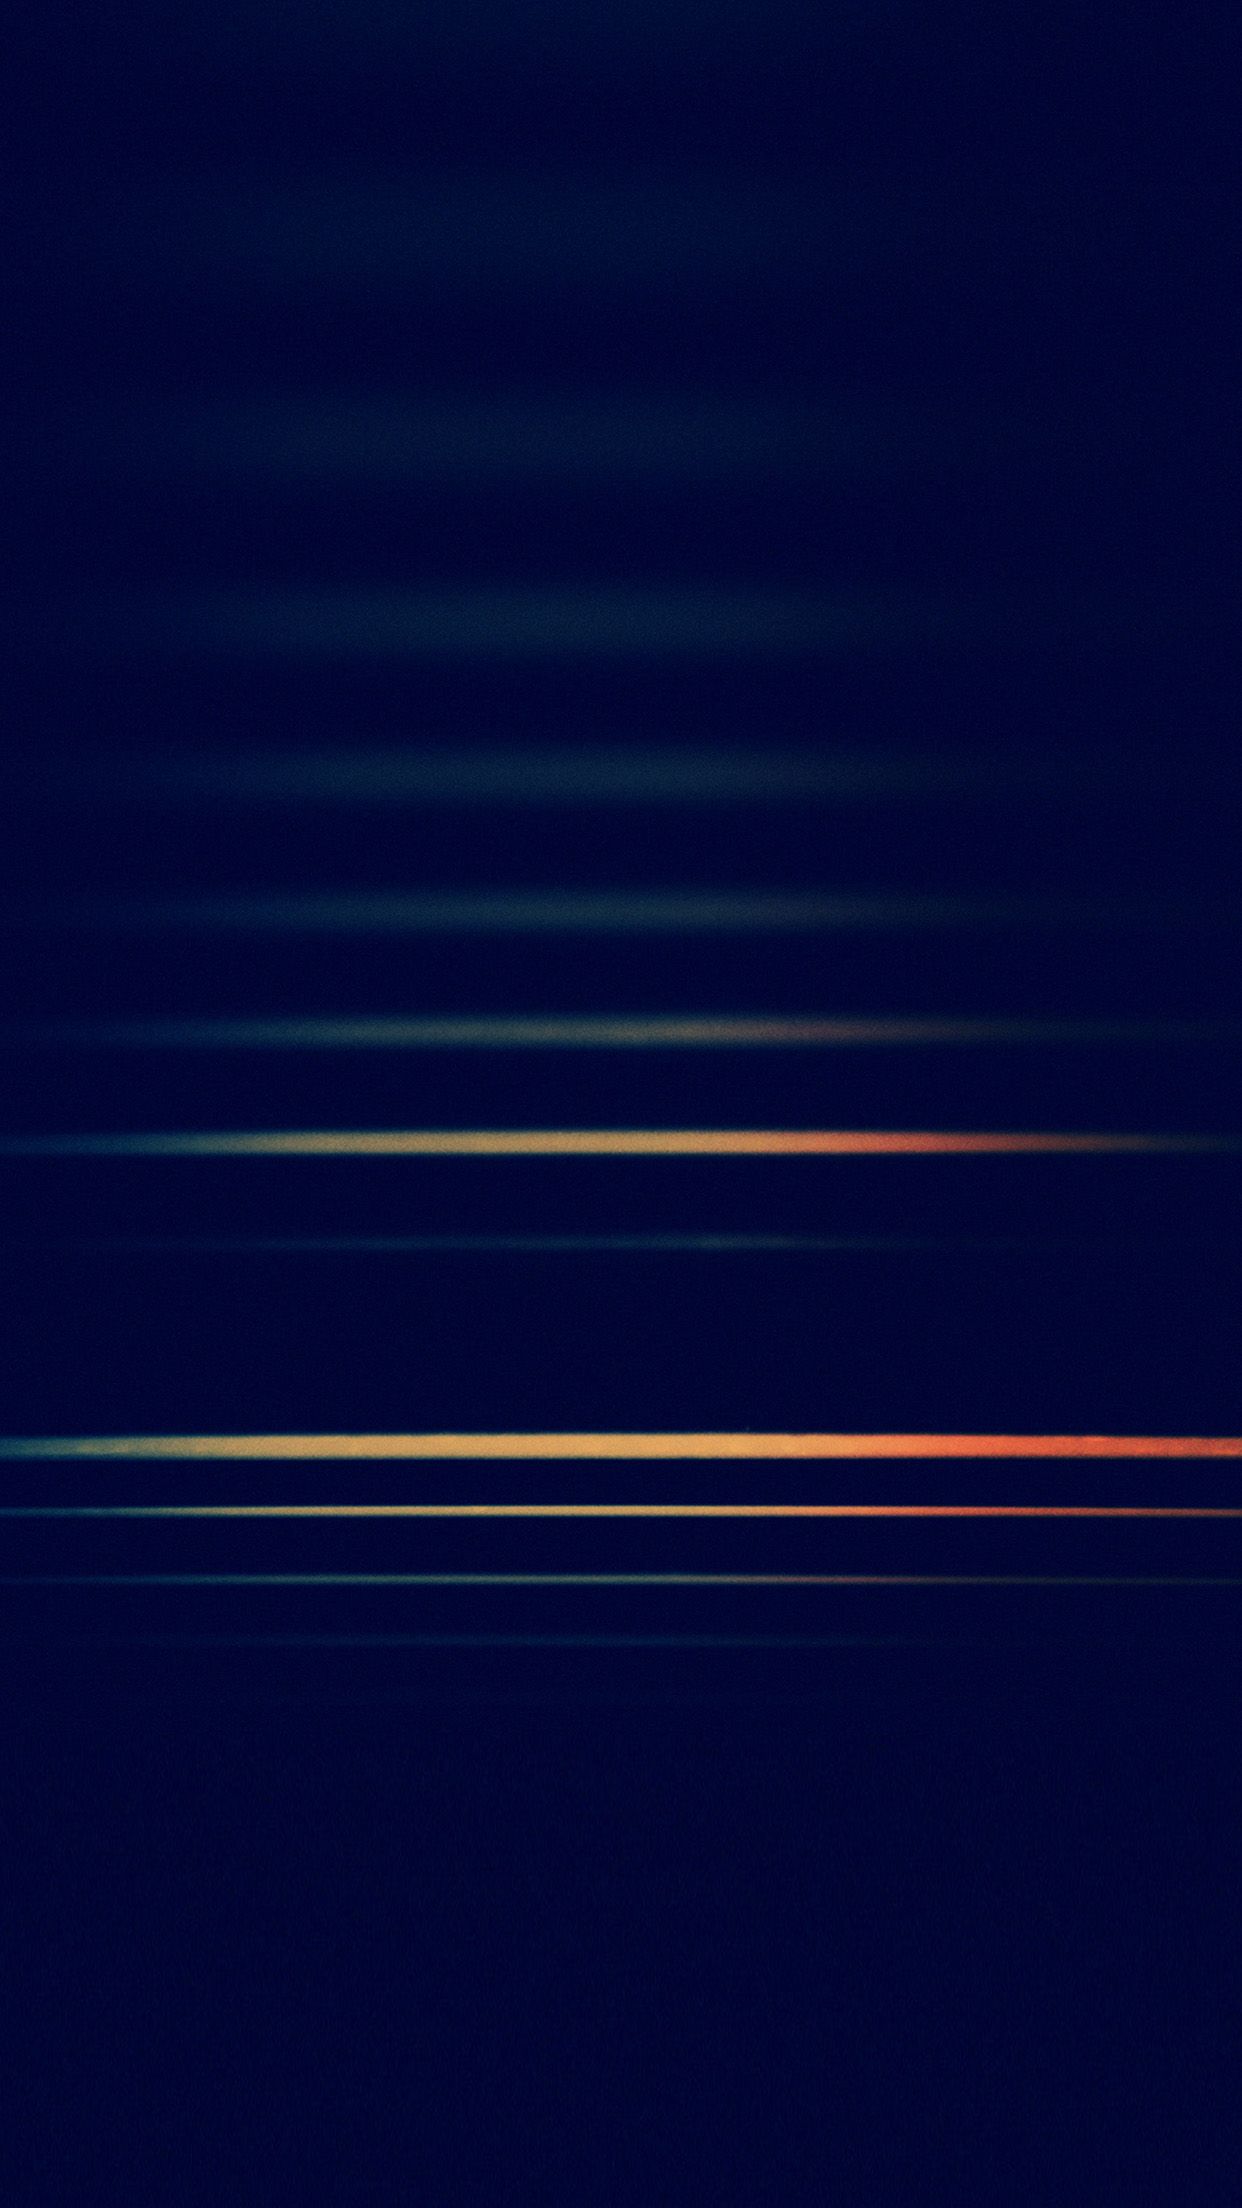 iPhone7 wallpaper. line blue red line pattern